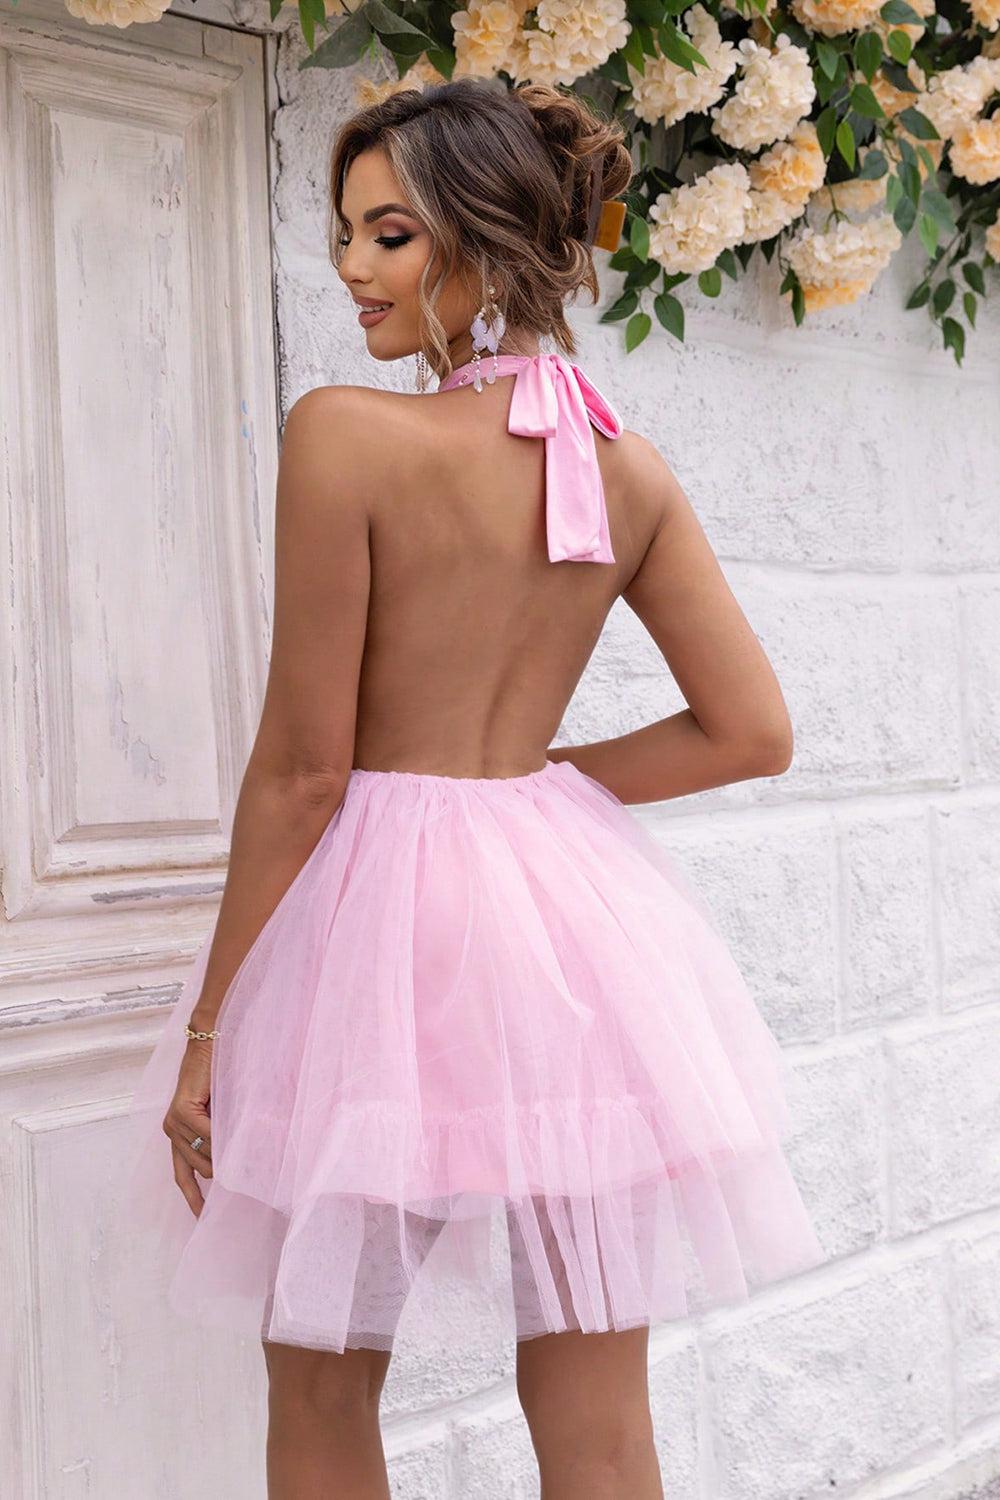 a woman wearing a pink dress with a bow on the back